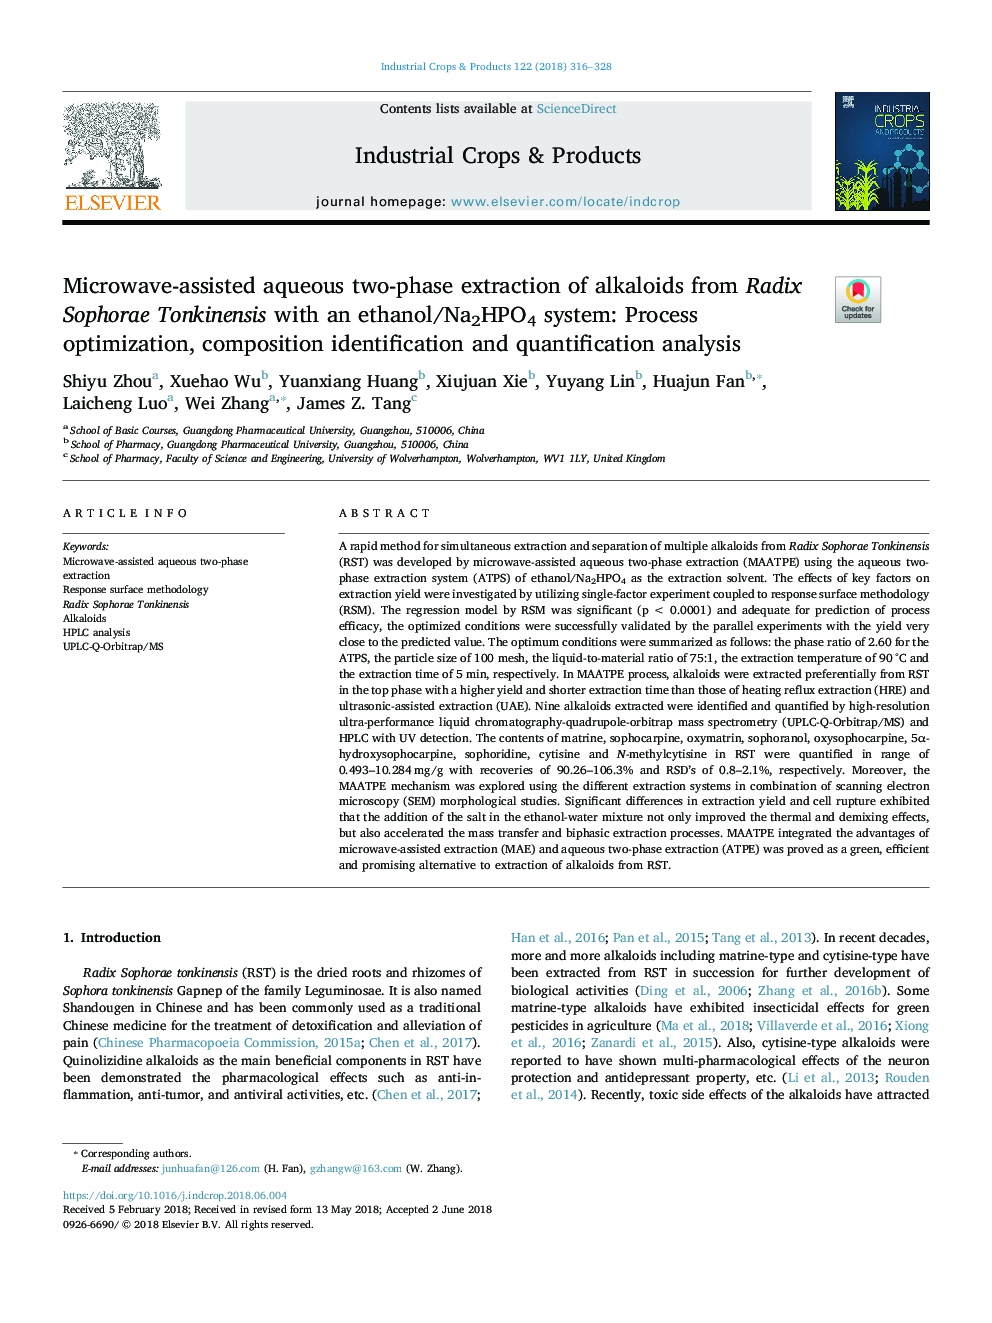 Microwave-assisted aqueous two-phase extraction of alkaloids from Radix Sophorae Tonkinensis with an ethanol/Na2HPO4 system: Process optimization, composition identification and quantification analysis